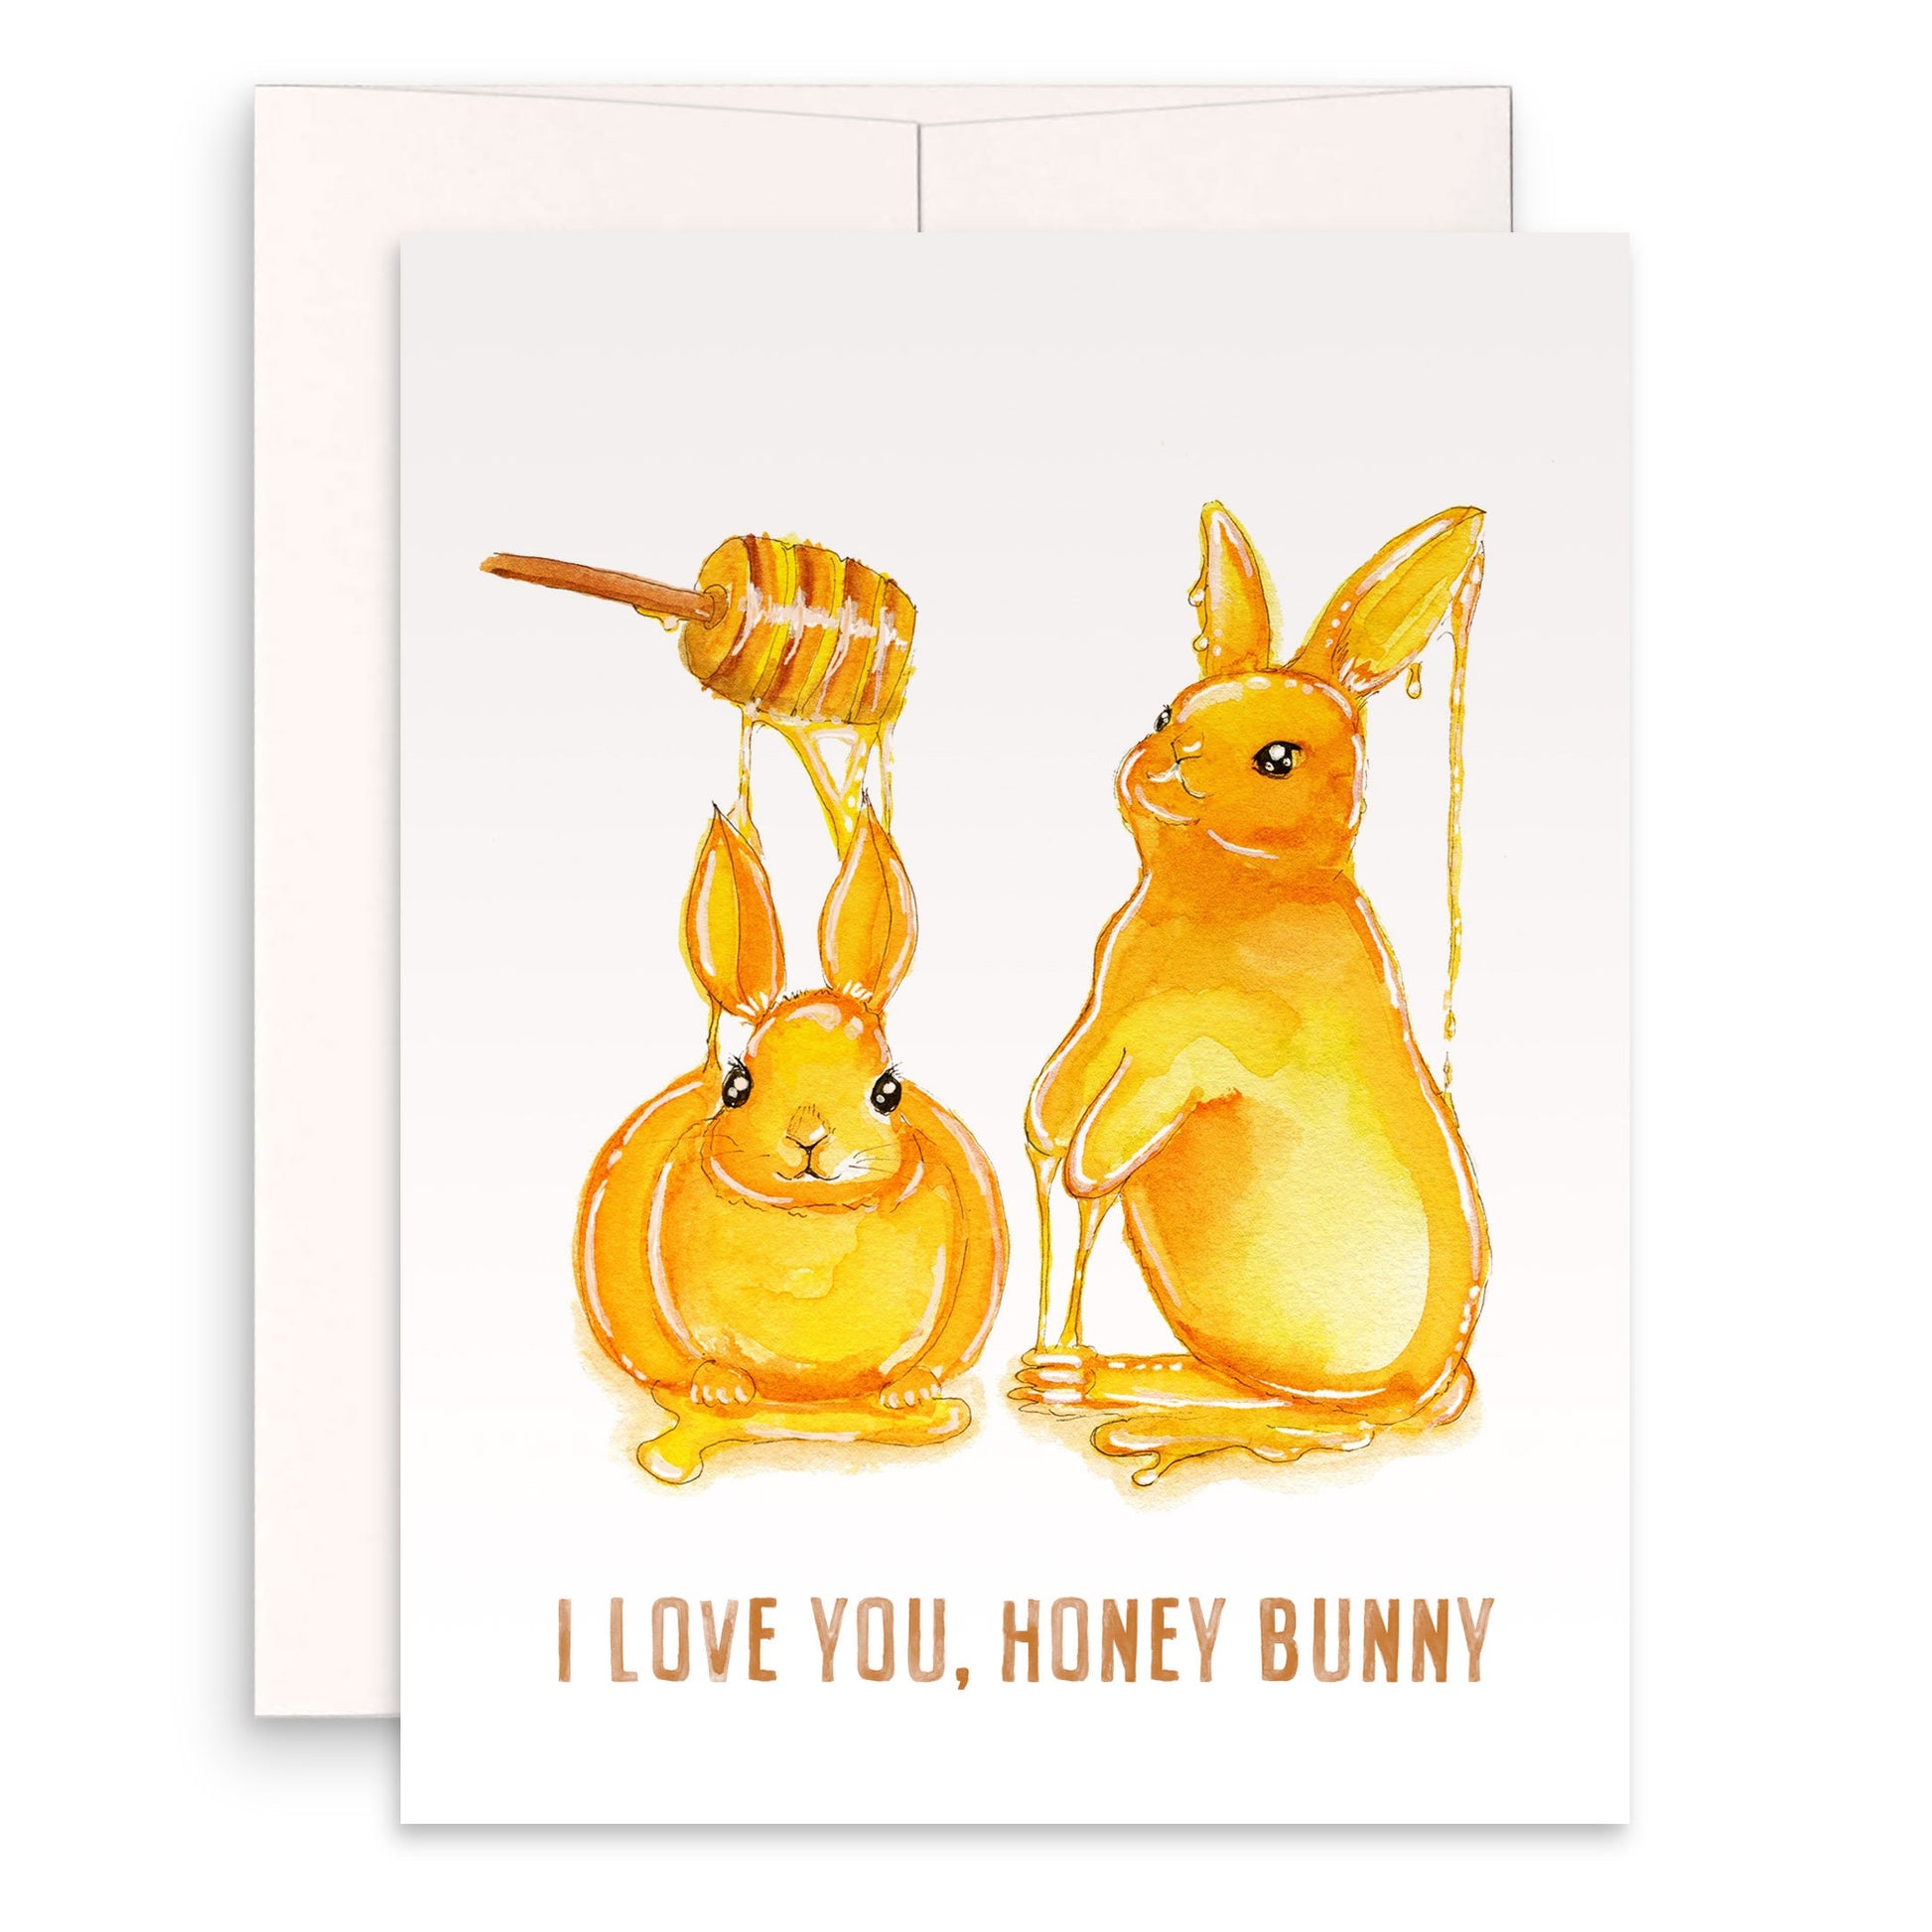 Honey Bunny Love Card For Husband - Cute Valentine Cards For Rabbit Lover Gift